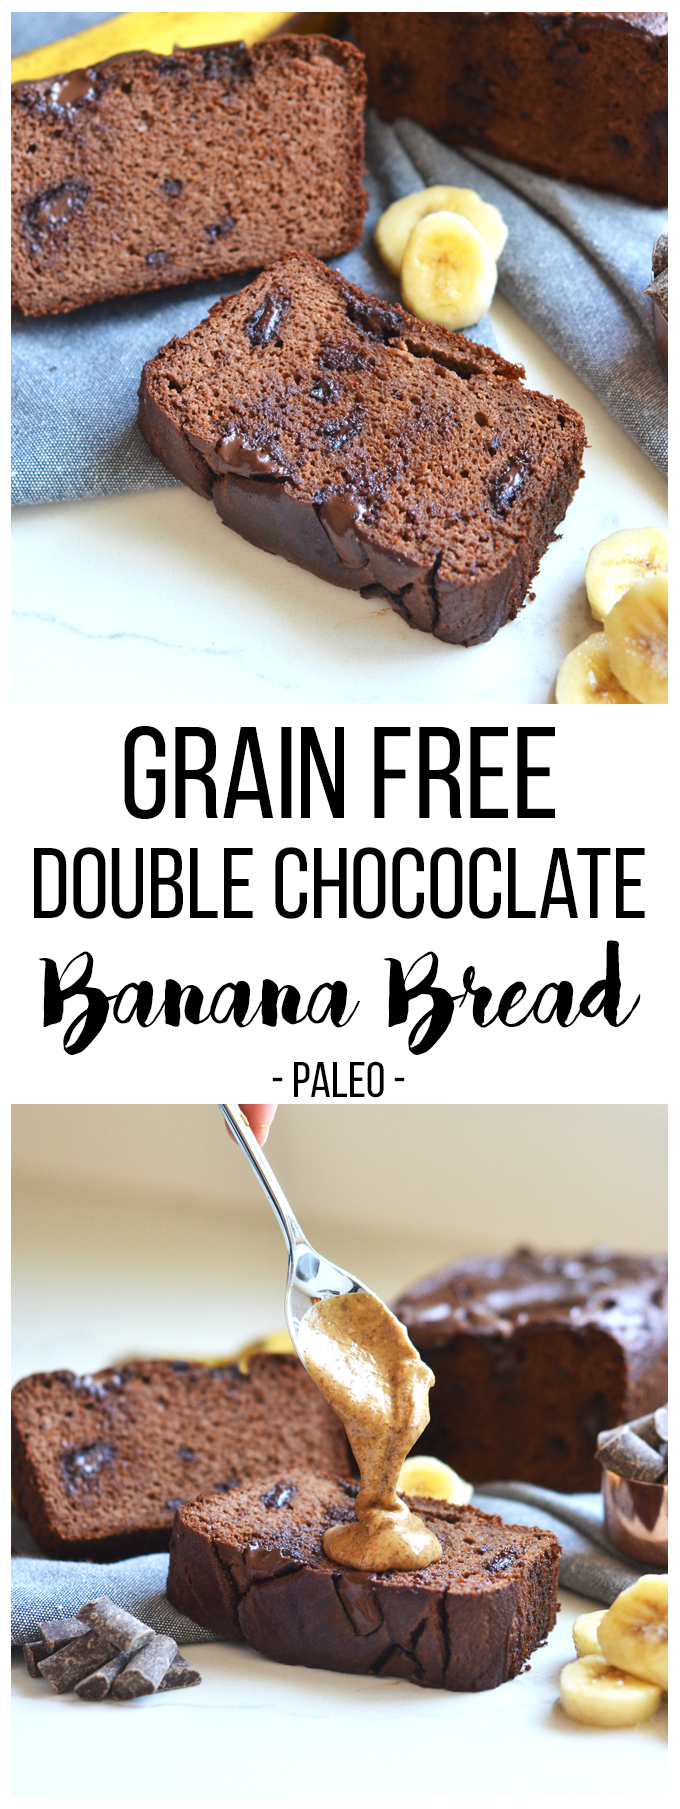 This Grain Free Double Chocolate Banana Bread is moist, chocolately and loved by everyone - paleo or not!!